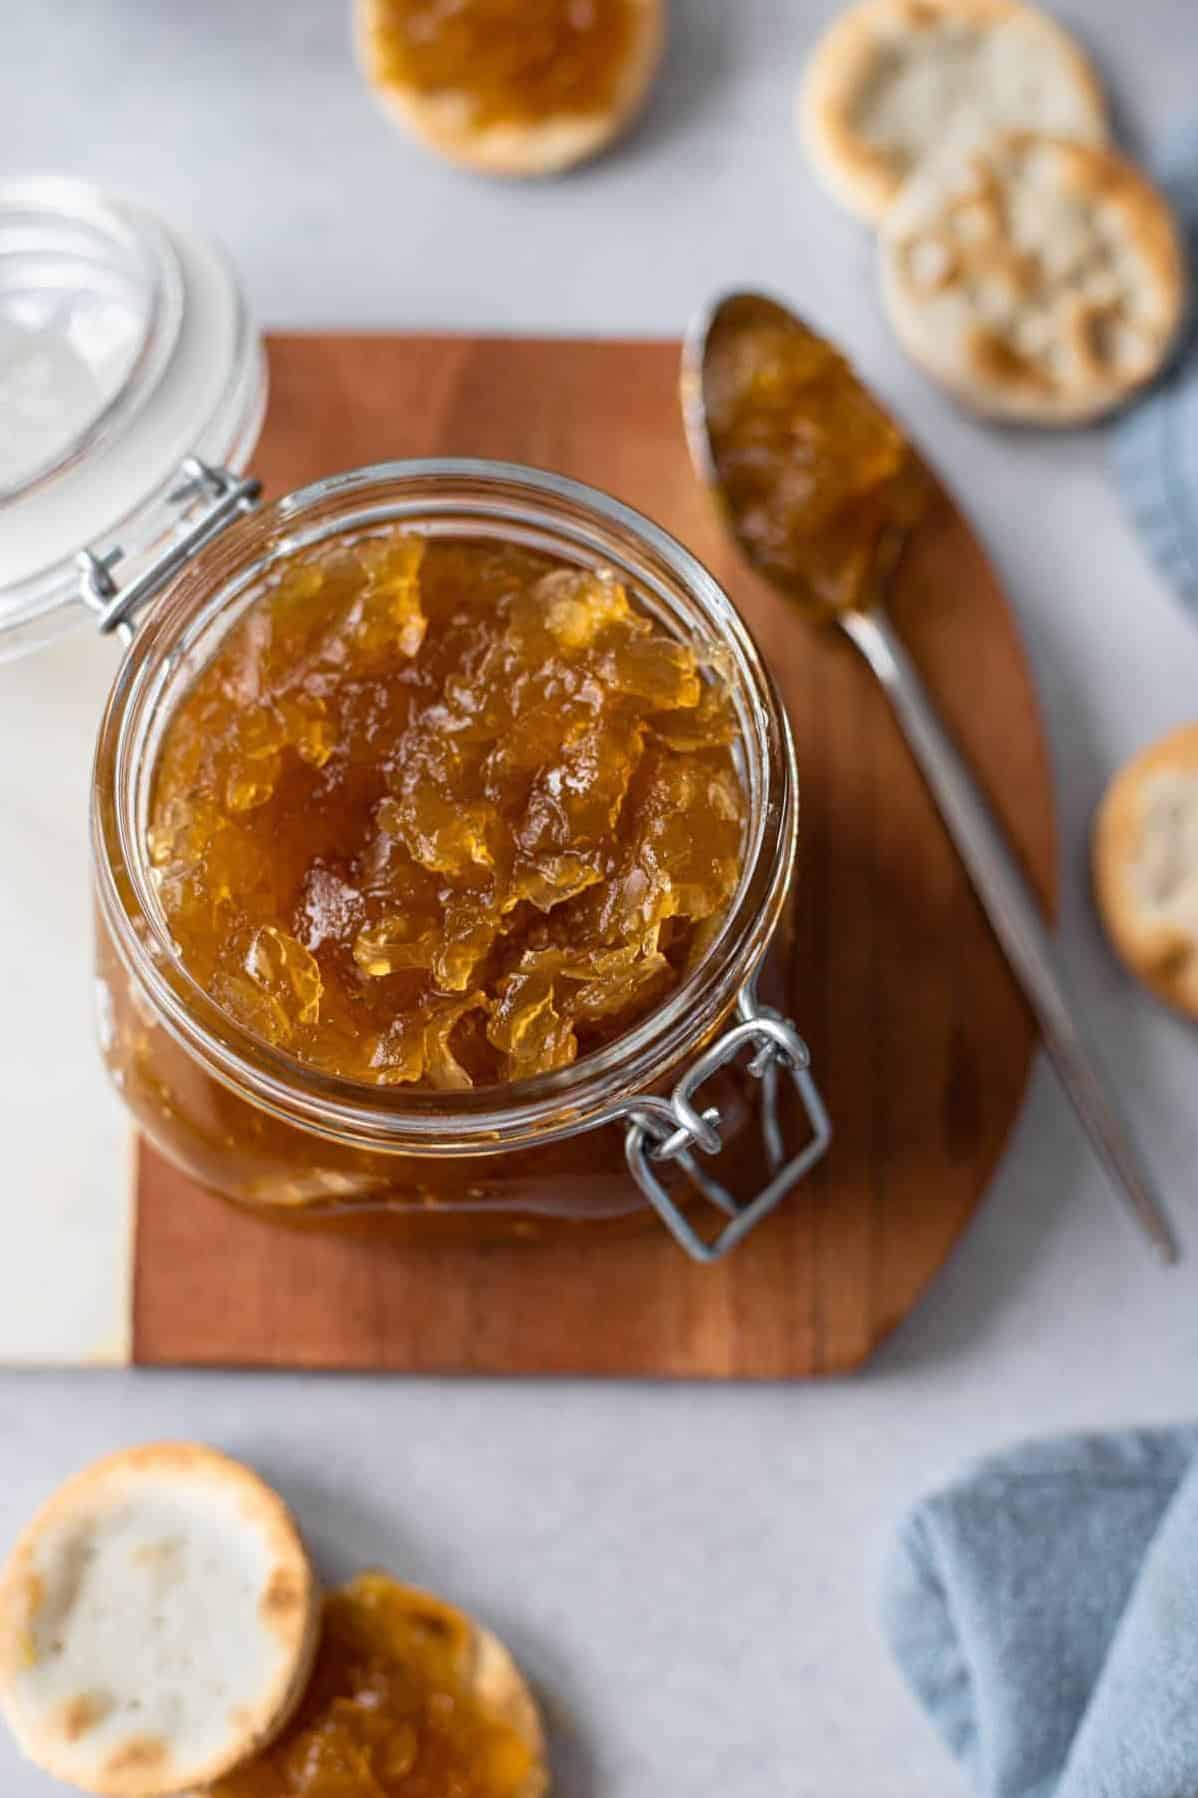  This jam is a perfect topping for toast, bagels, or English muffins.